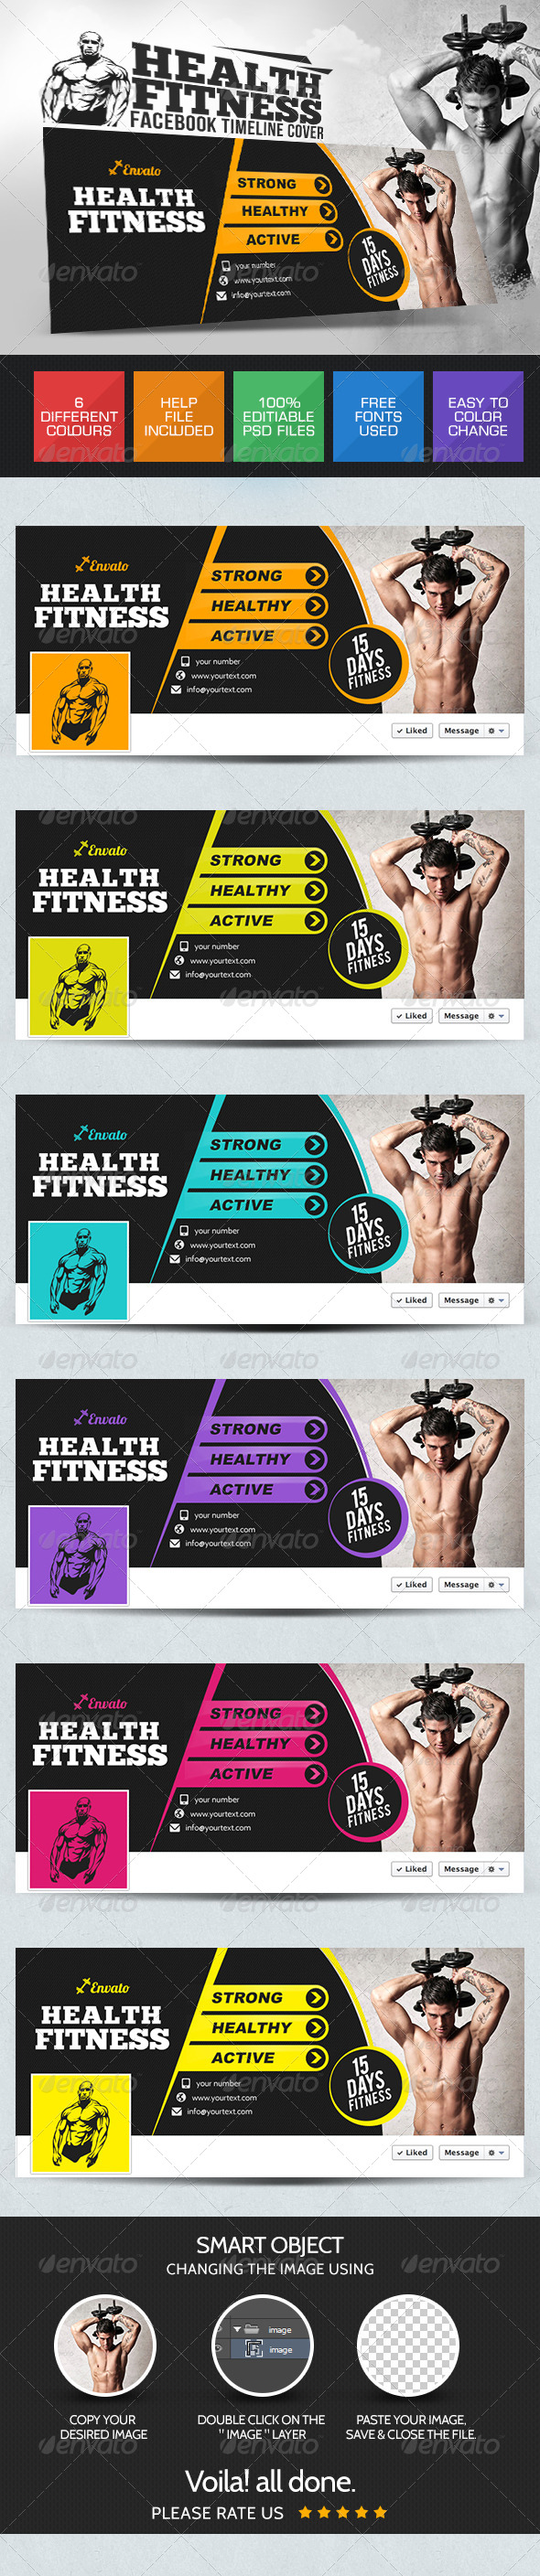 Health & Fitness Facebook Cover Pages